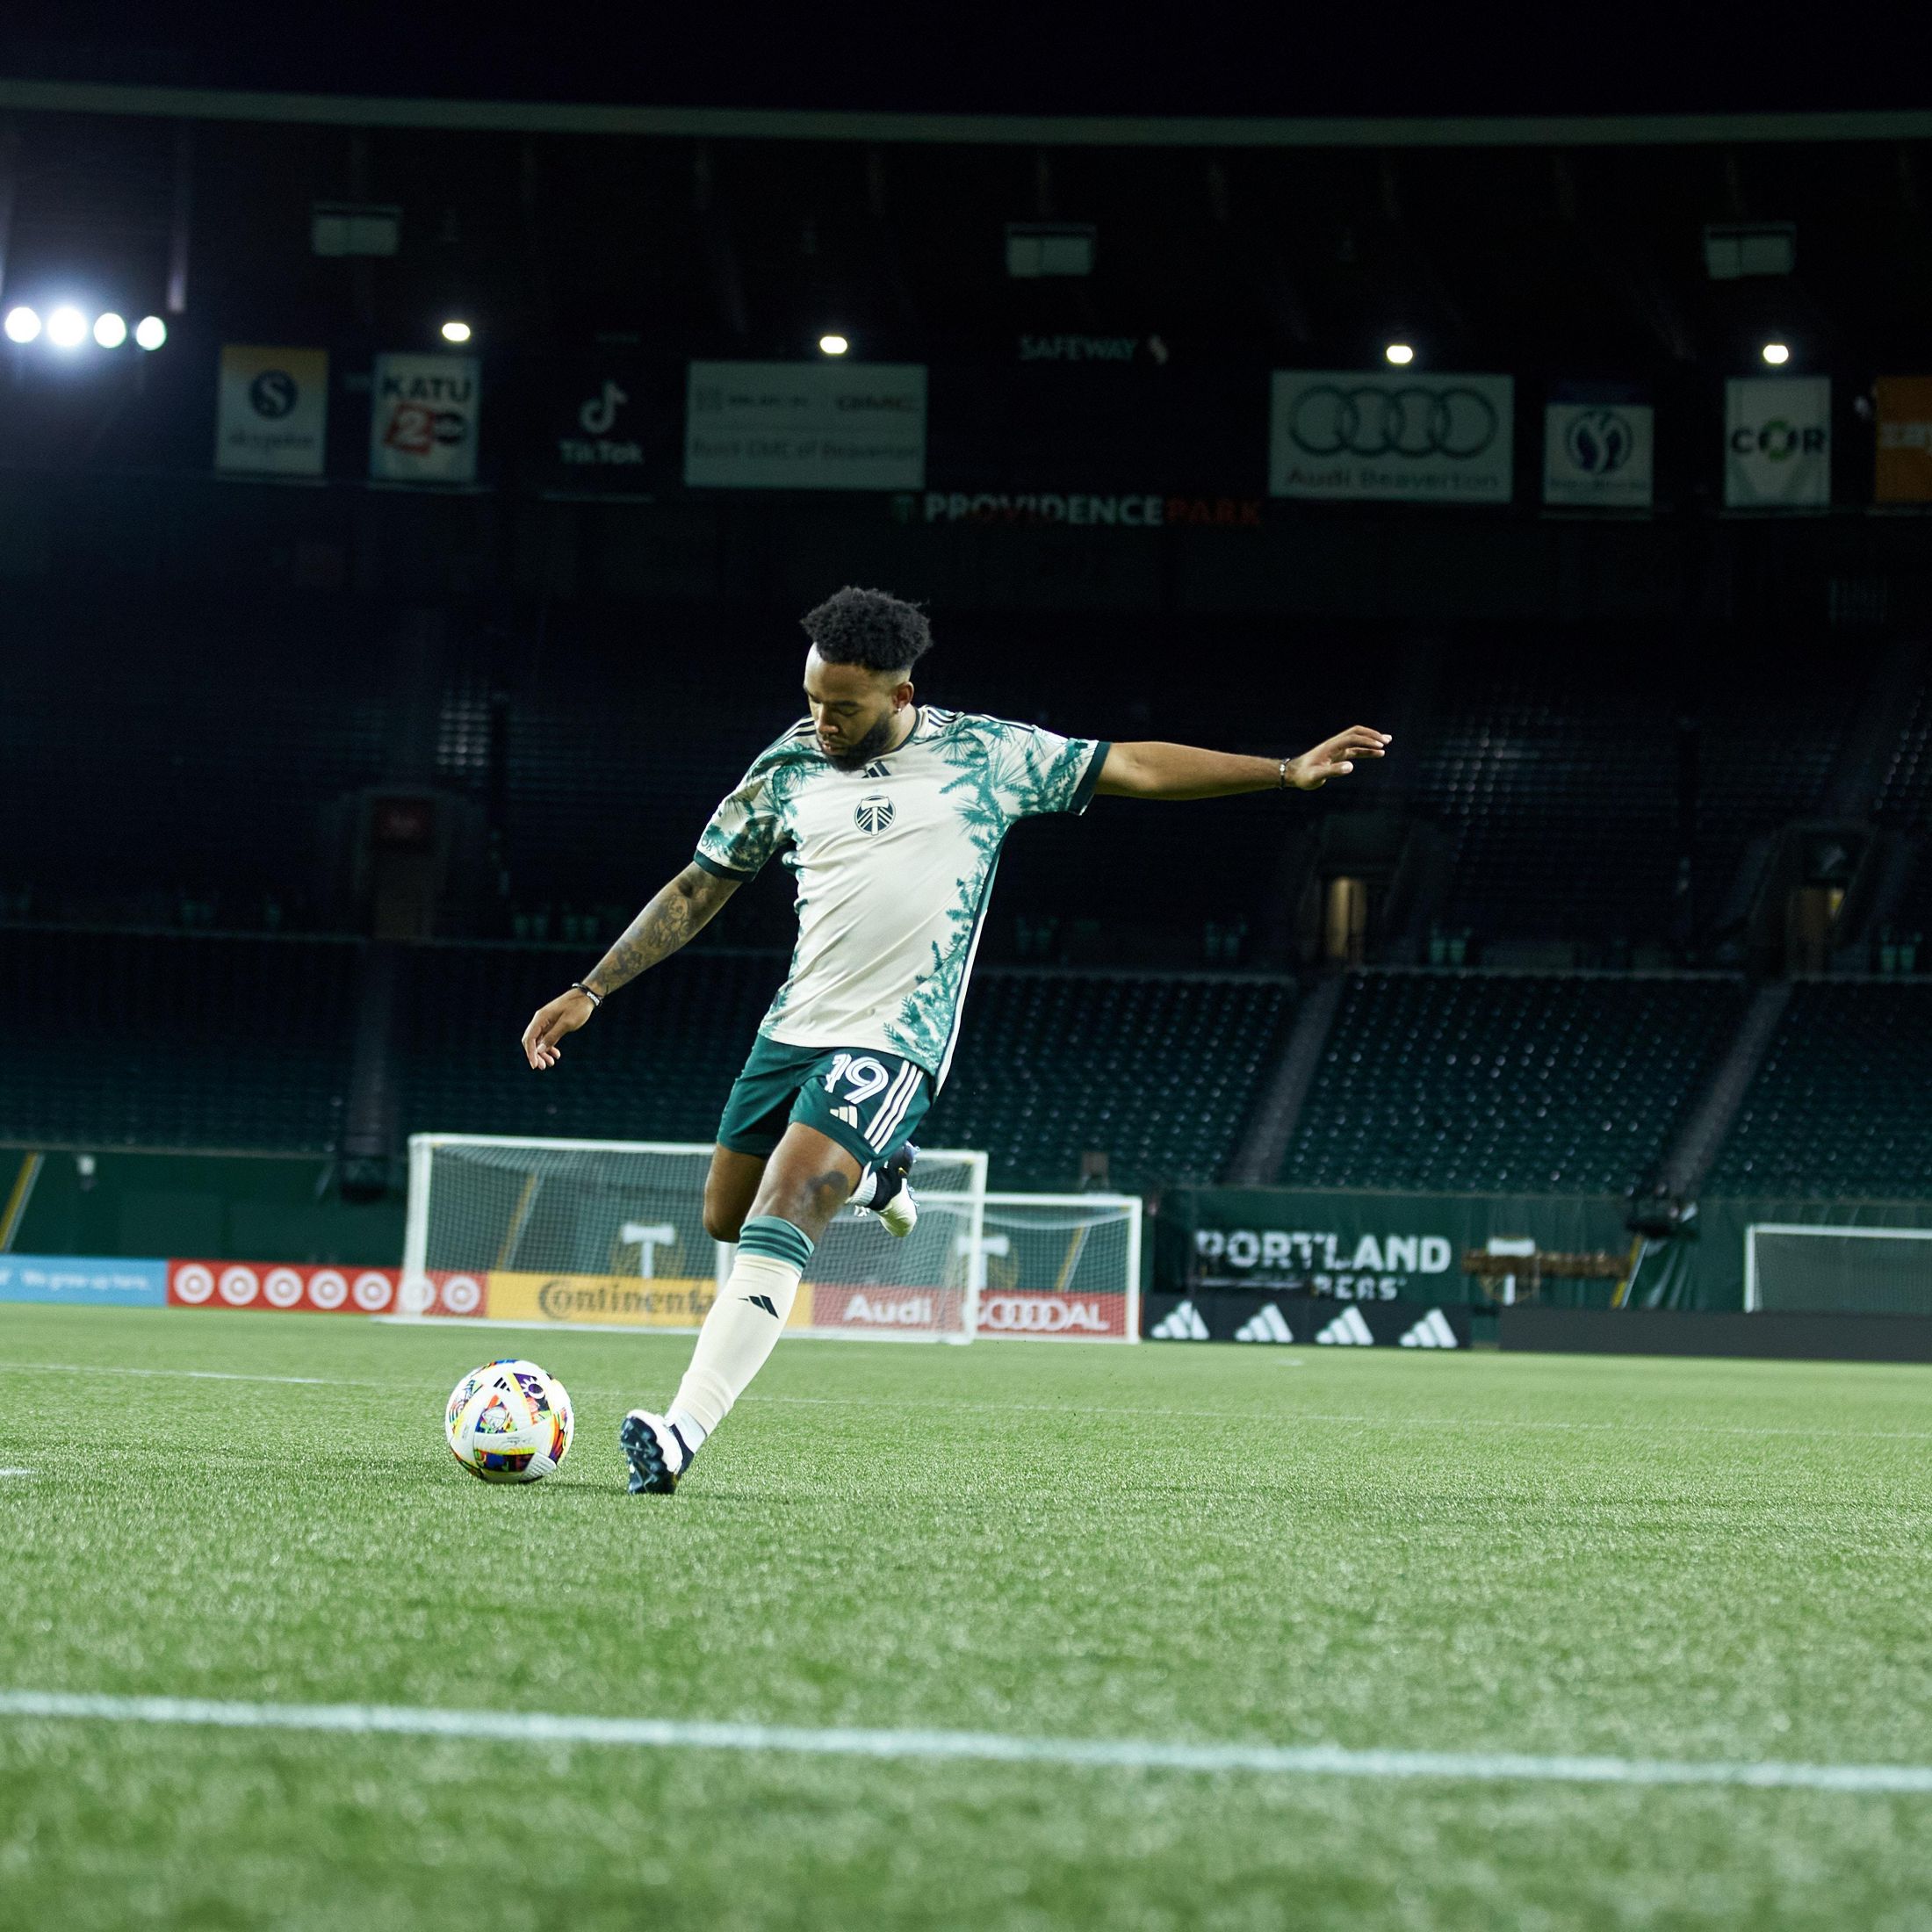  Eryk Williamson of the Portland Timbers going in for a free kick.